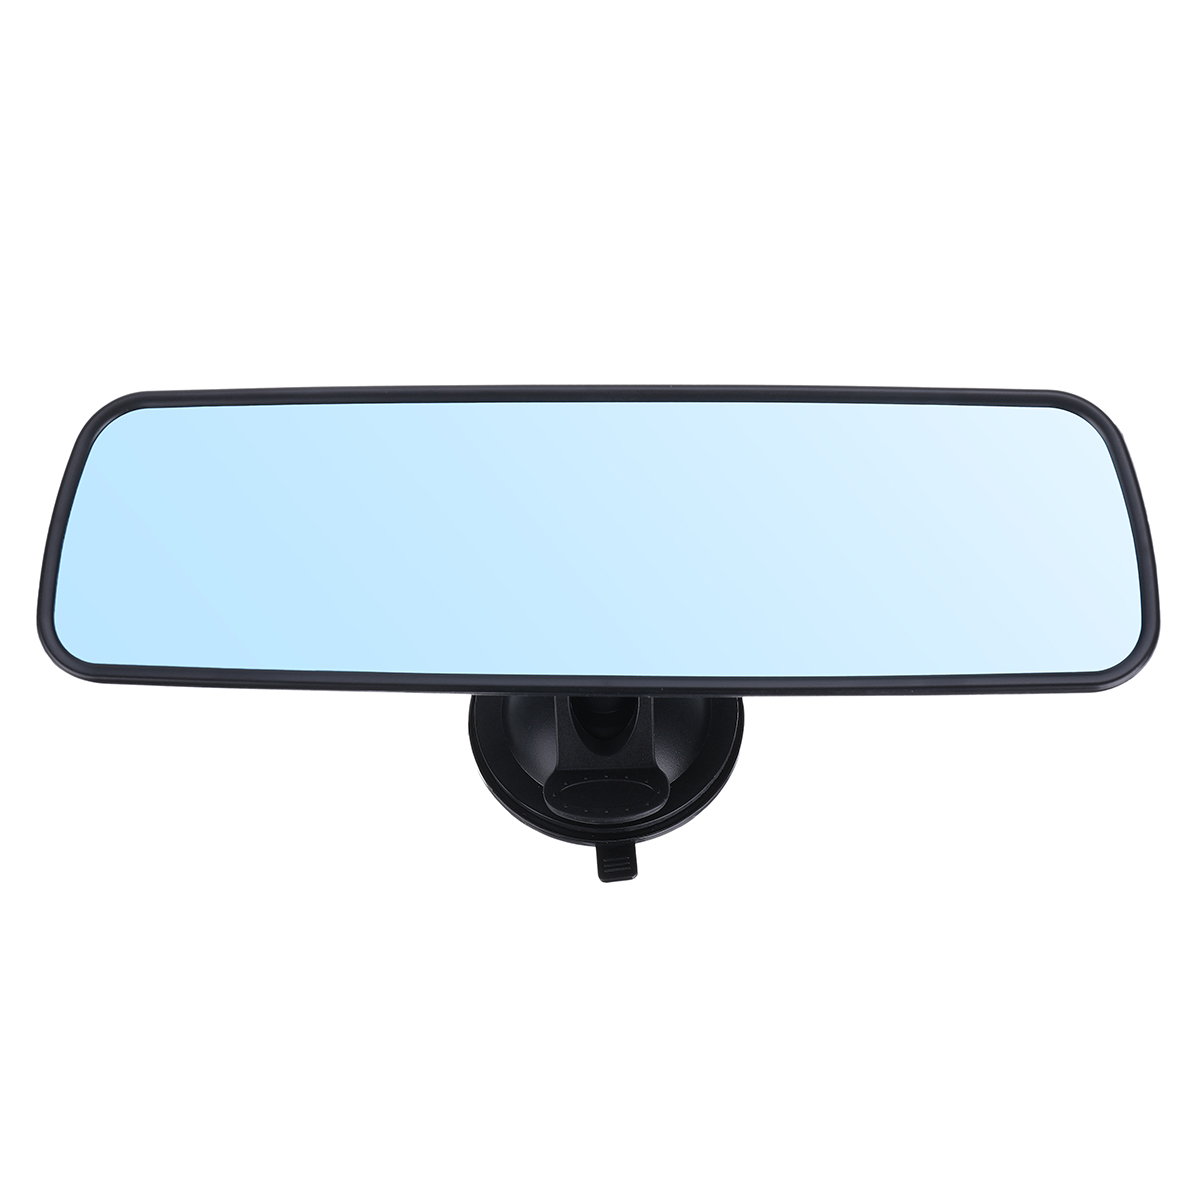 ELUTO Anti-Glare Rear View Mirror Universal Interior Rearview Mirror with Suction Cup for Car Truck SUV 9.5'' (240Mm)